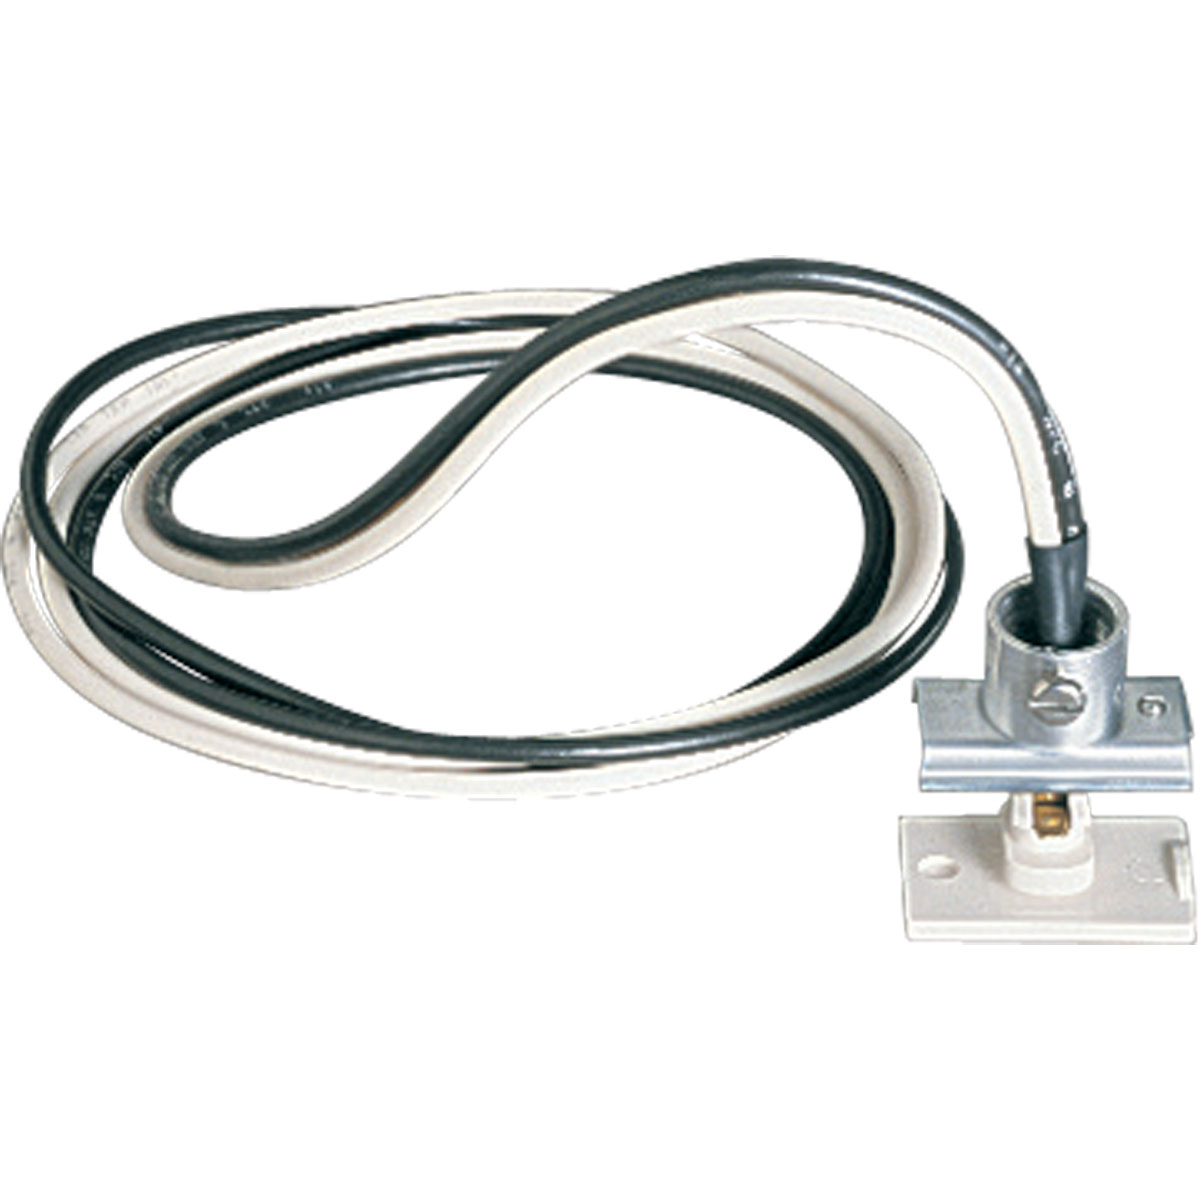 Anywhere Power Feed with 3/8 in Greenfield connector. Has 72 in of wire. Includes one P8717-01 dead end. White finish.